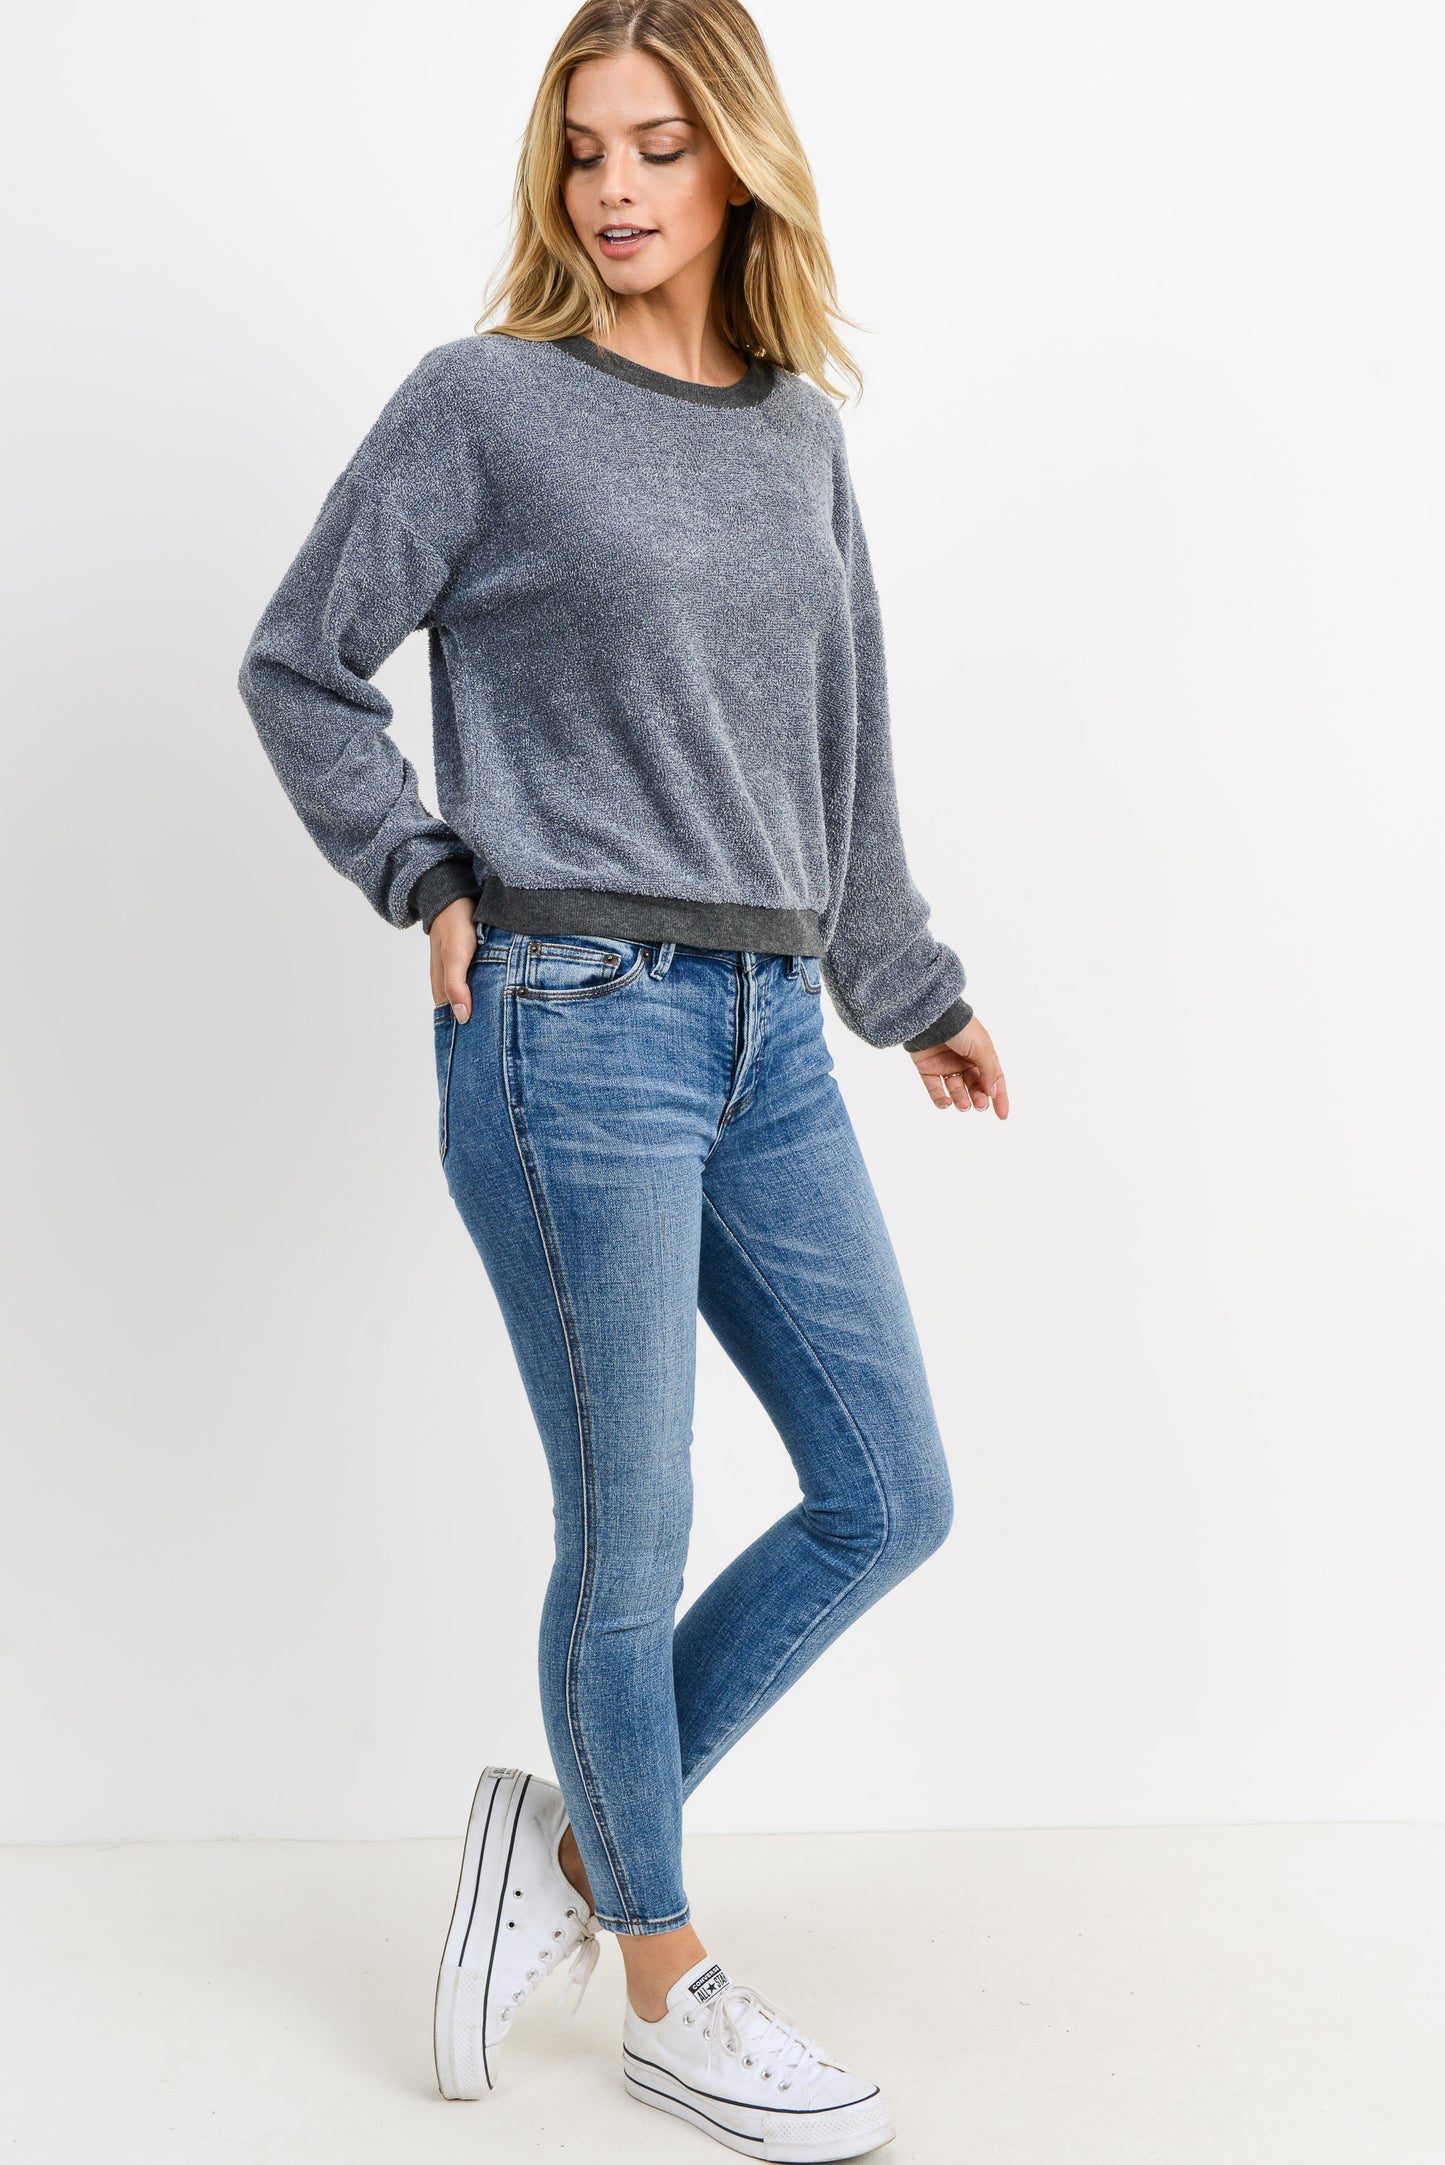 Textured Knit Rib Trimed Long Sleeve Top!